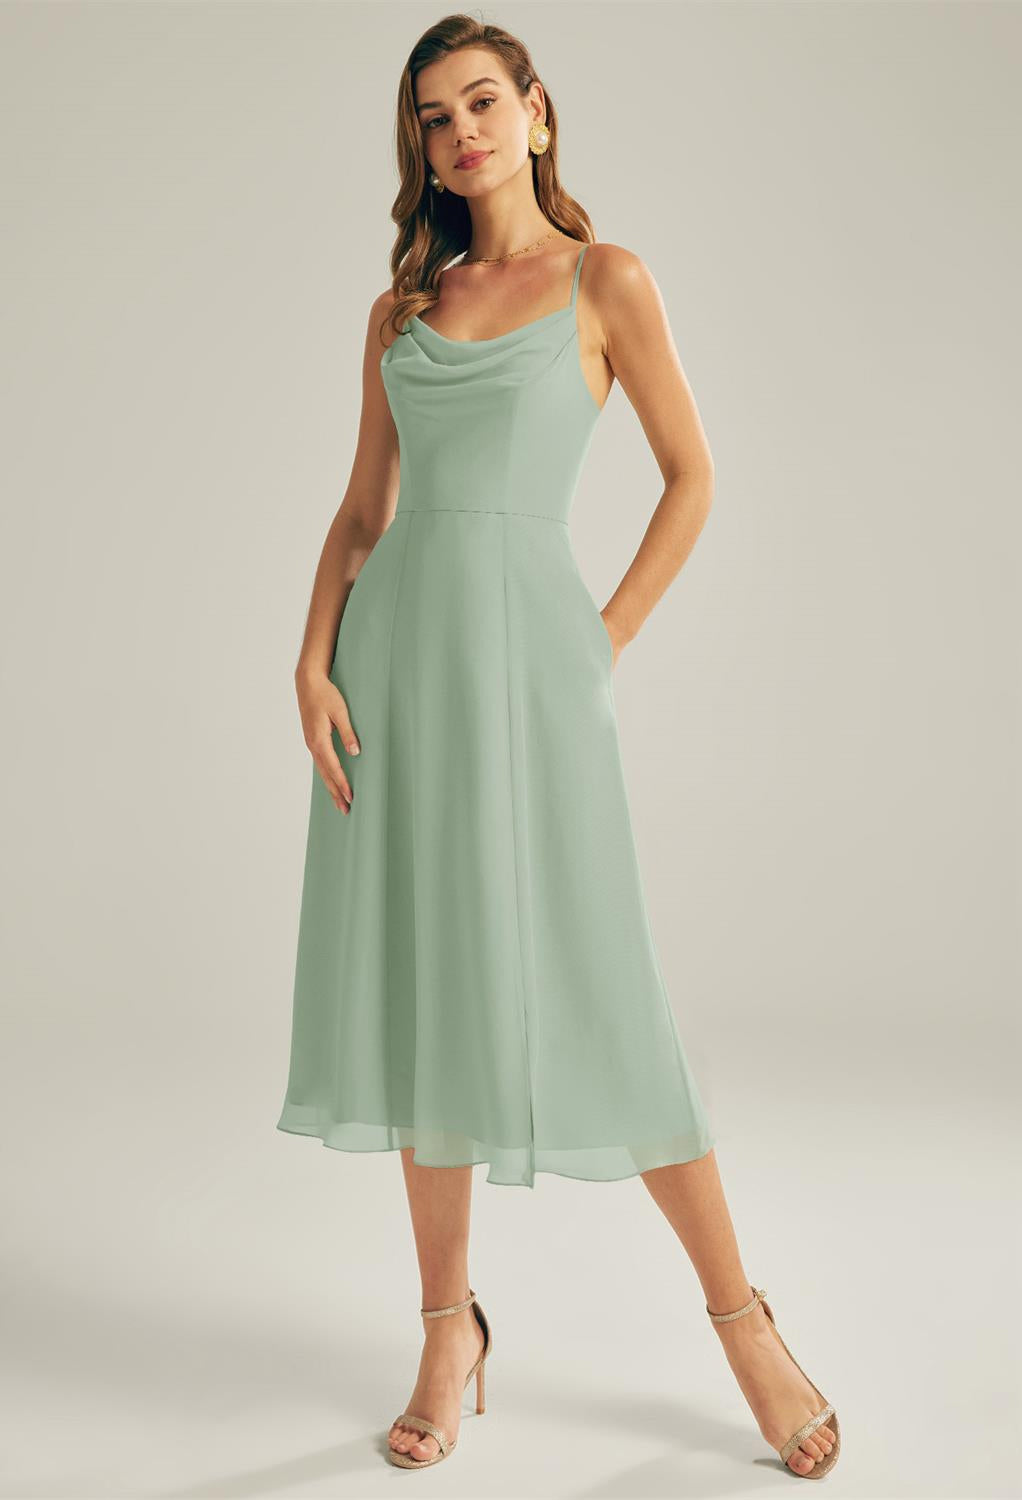 A woman in a green dress visited Bergamot Bridal, a bridal shop in London, to try on Maribel - Chiffon Bridesmaid Dress - Off the Rack.